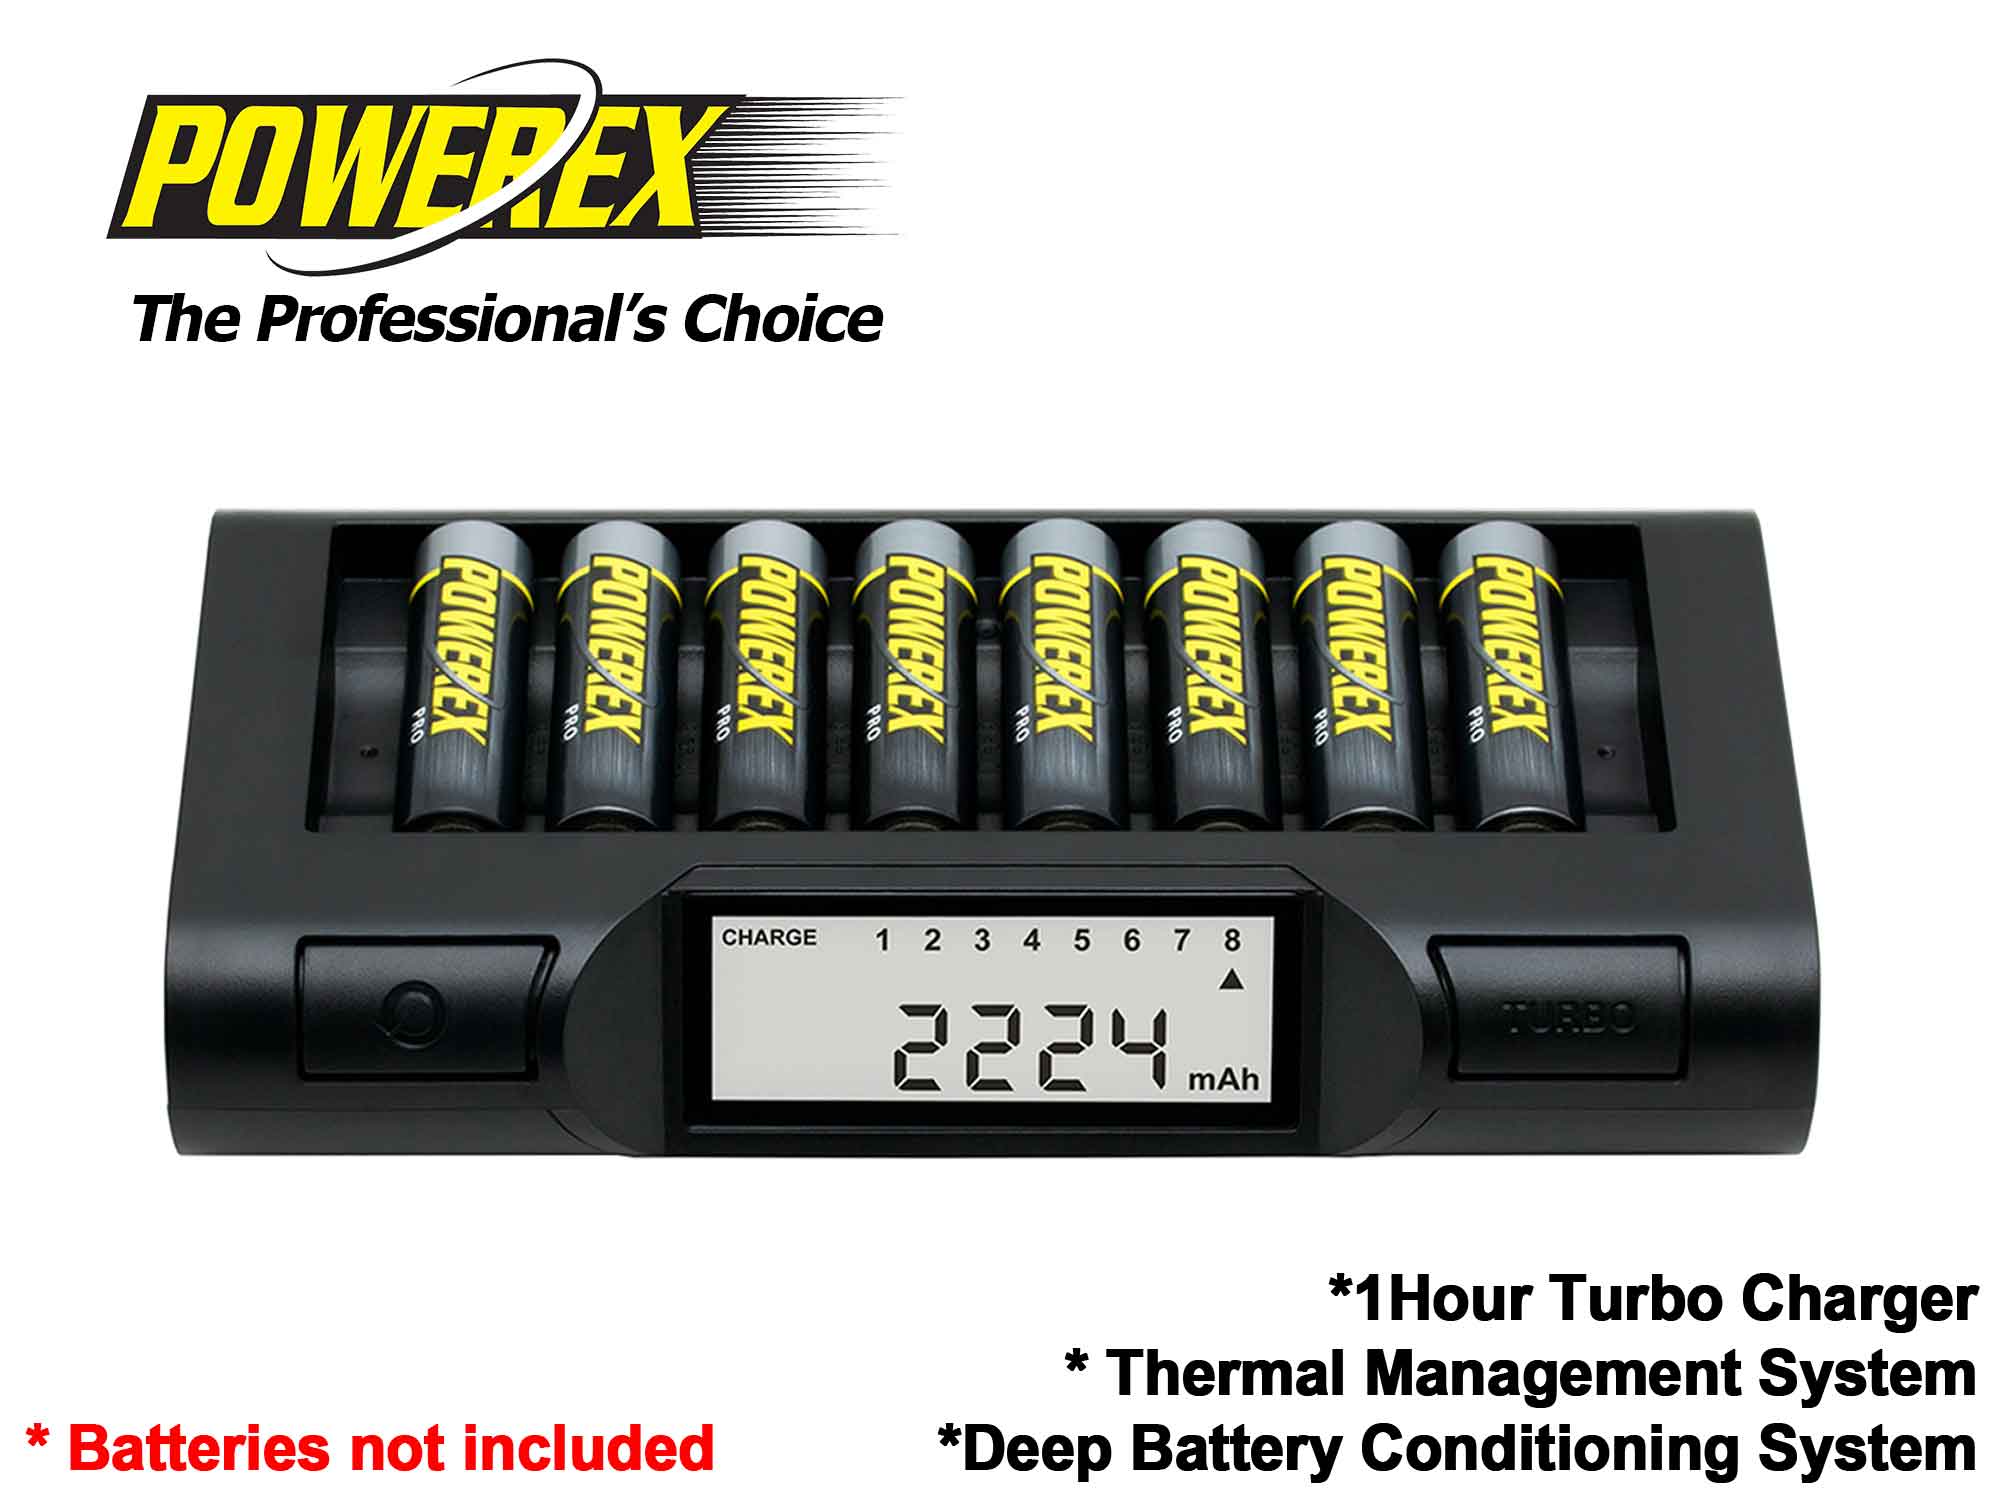 Powerex Turbo Charger/Analyzer for 8 AA/AAA Batteries